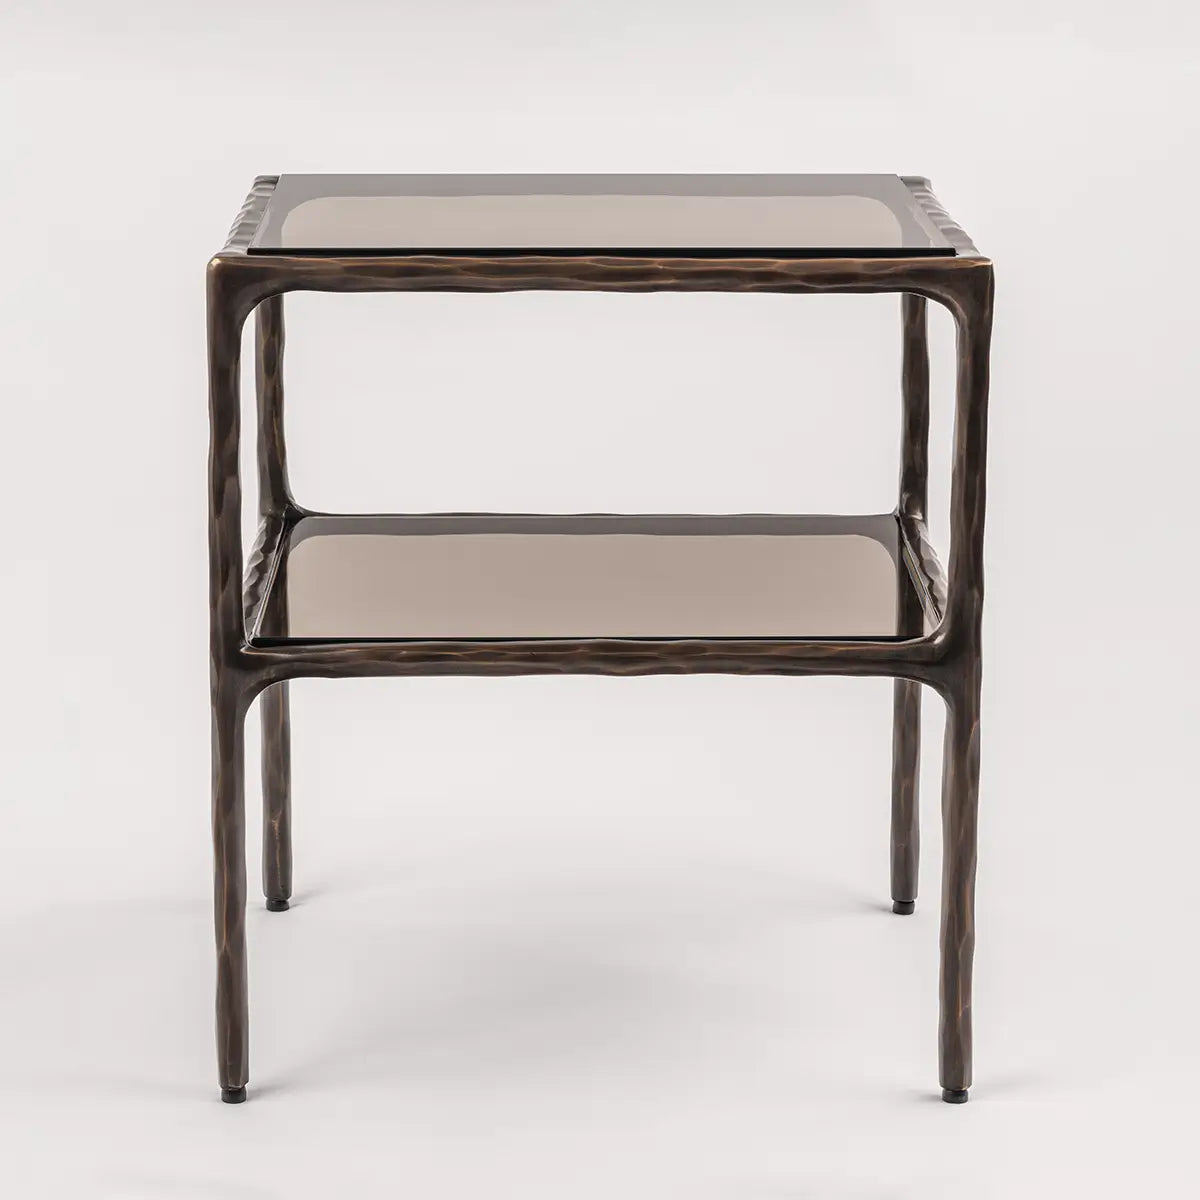 Forged Side Table Bronze Dorato